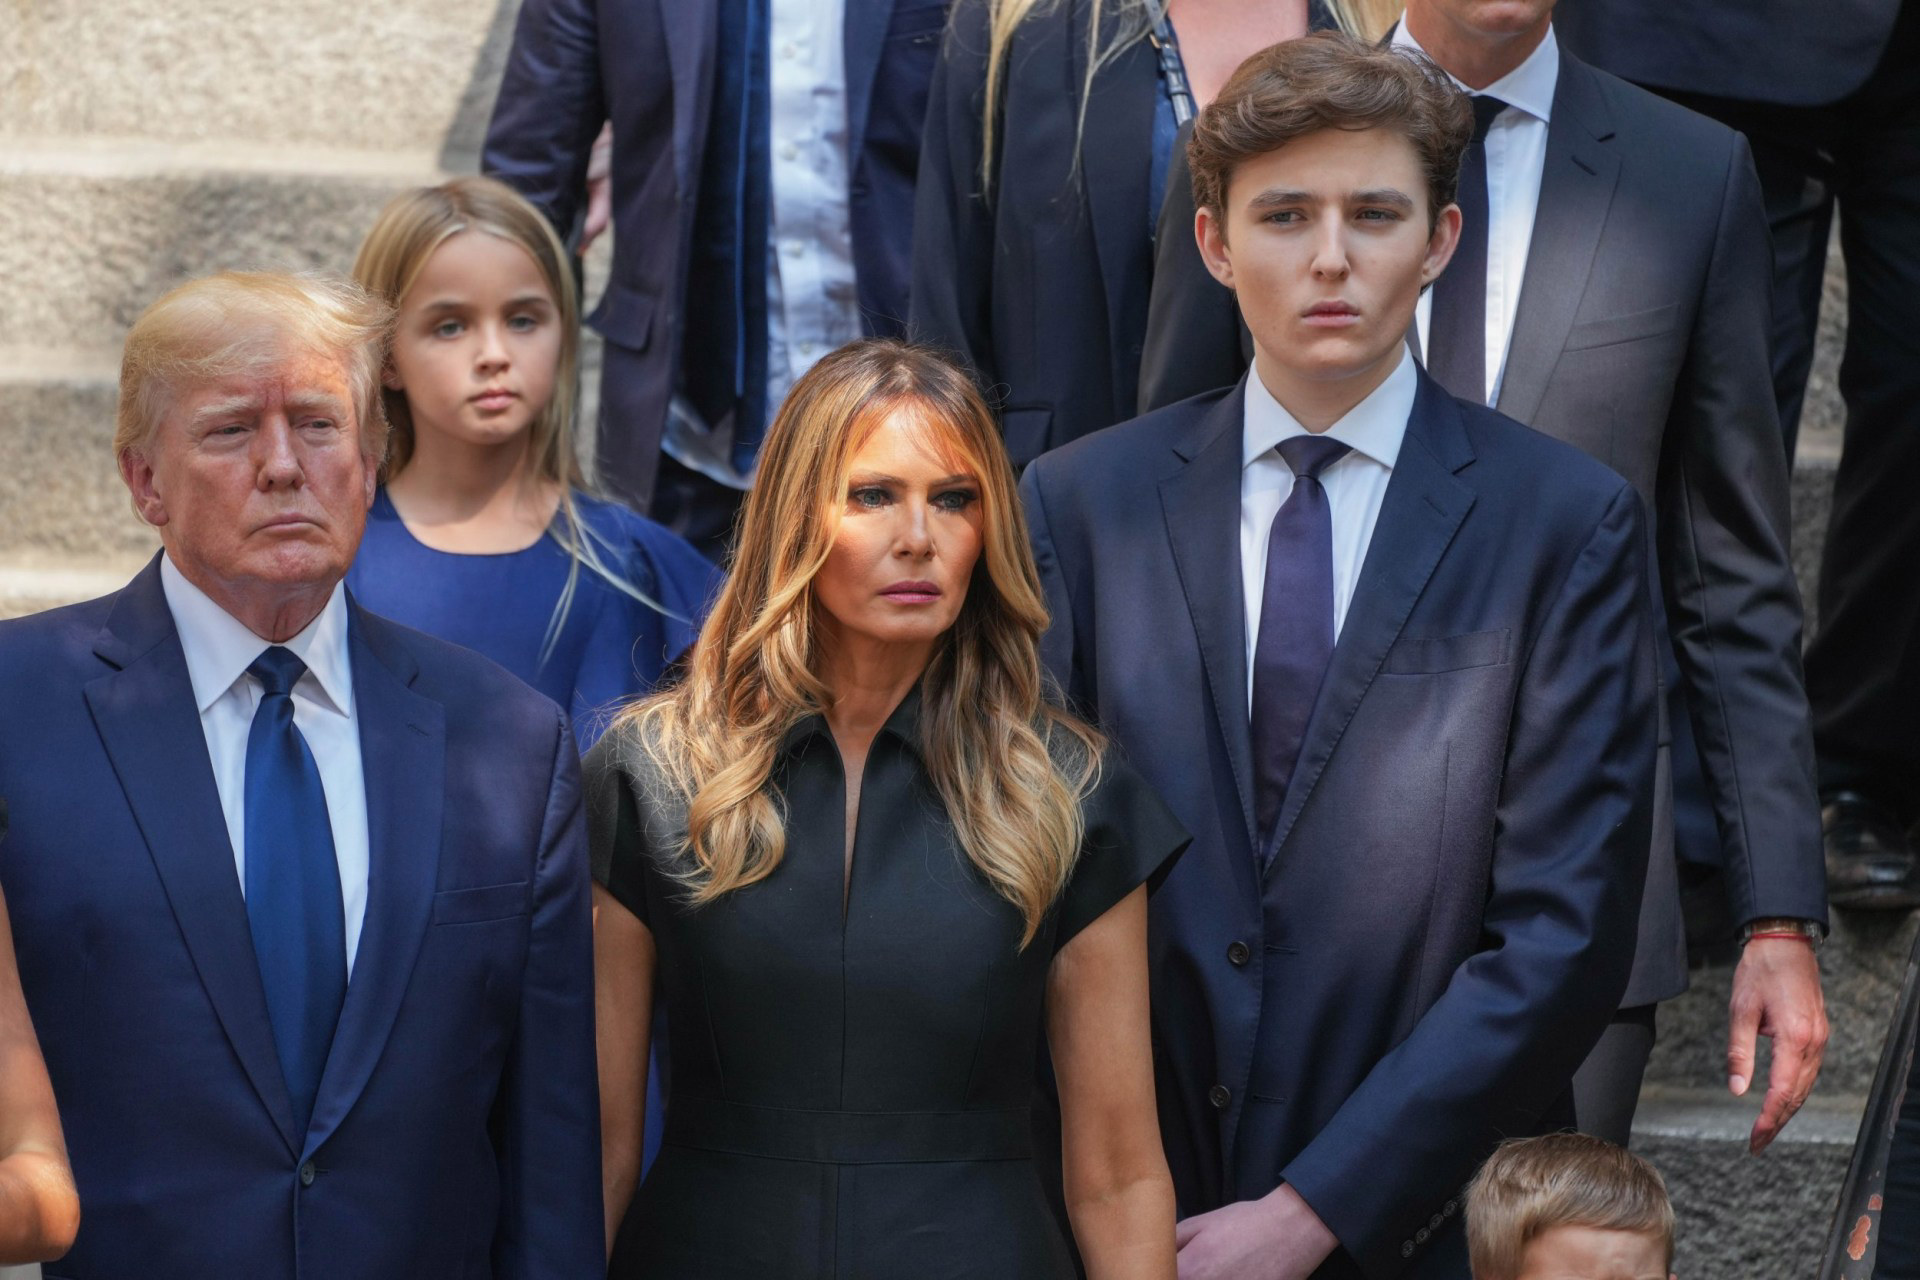 Trump reveals why his and Melania's son Barron is so tall